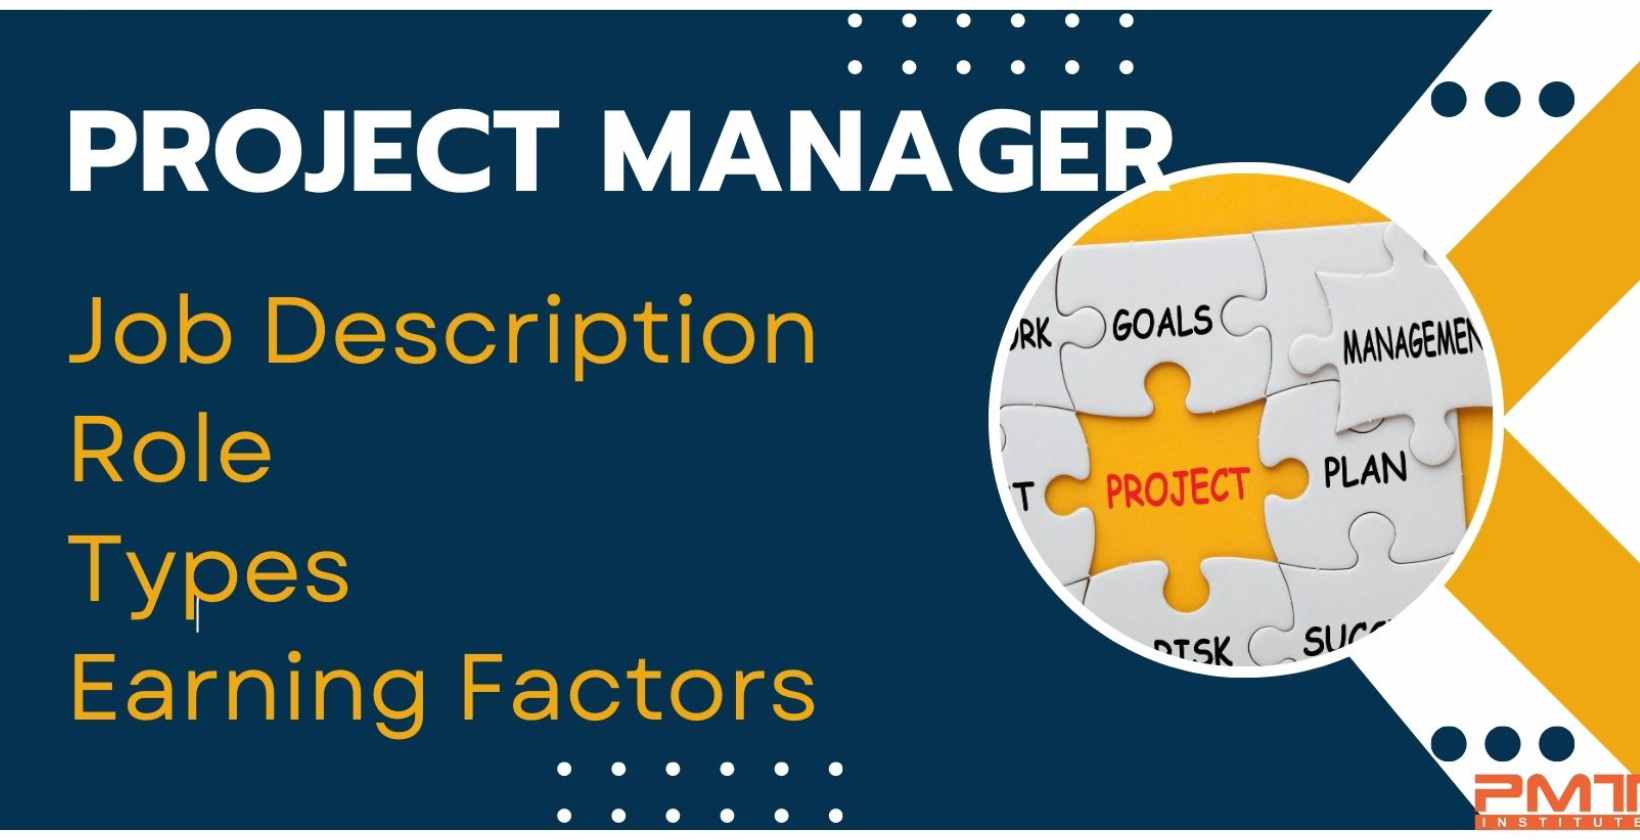 Project Manager: Job Description, Roles, Types, and Earning Factors